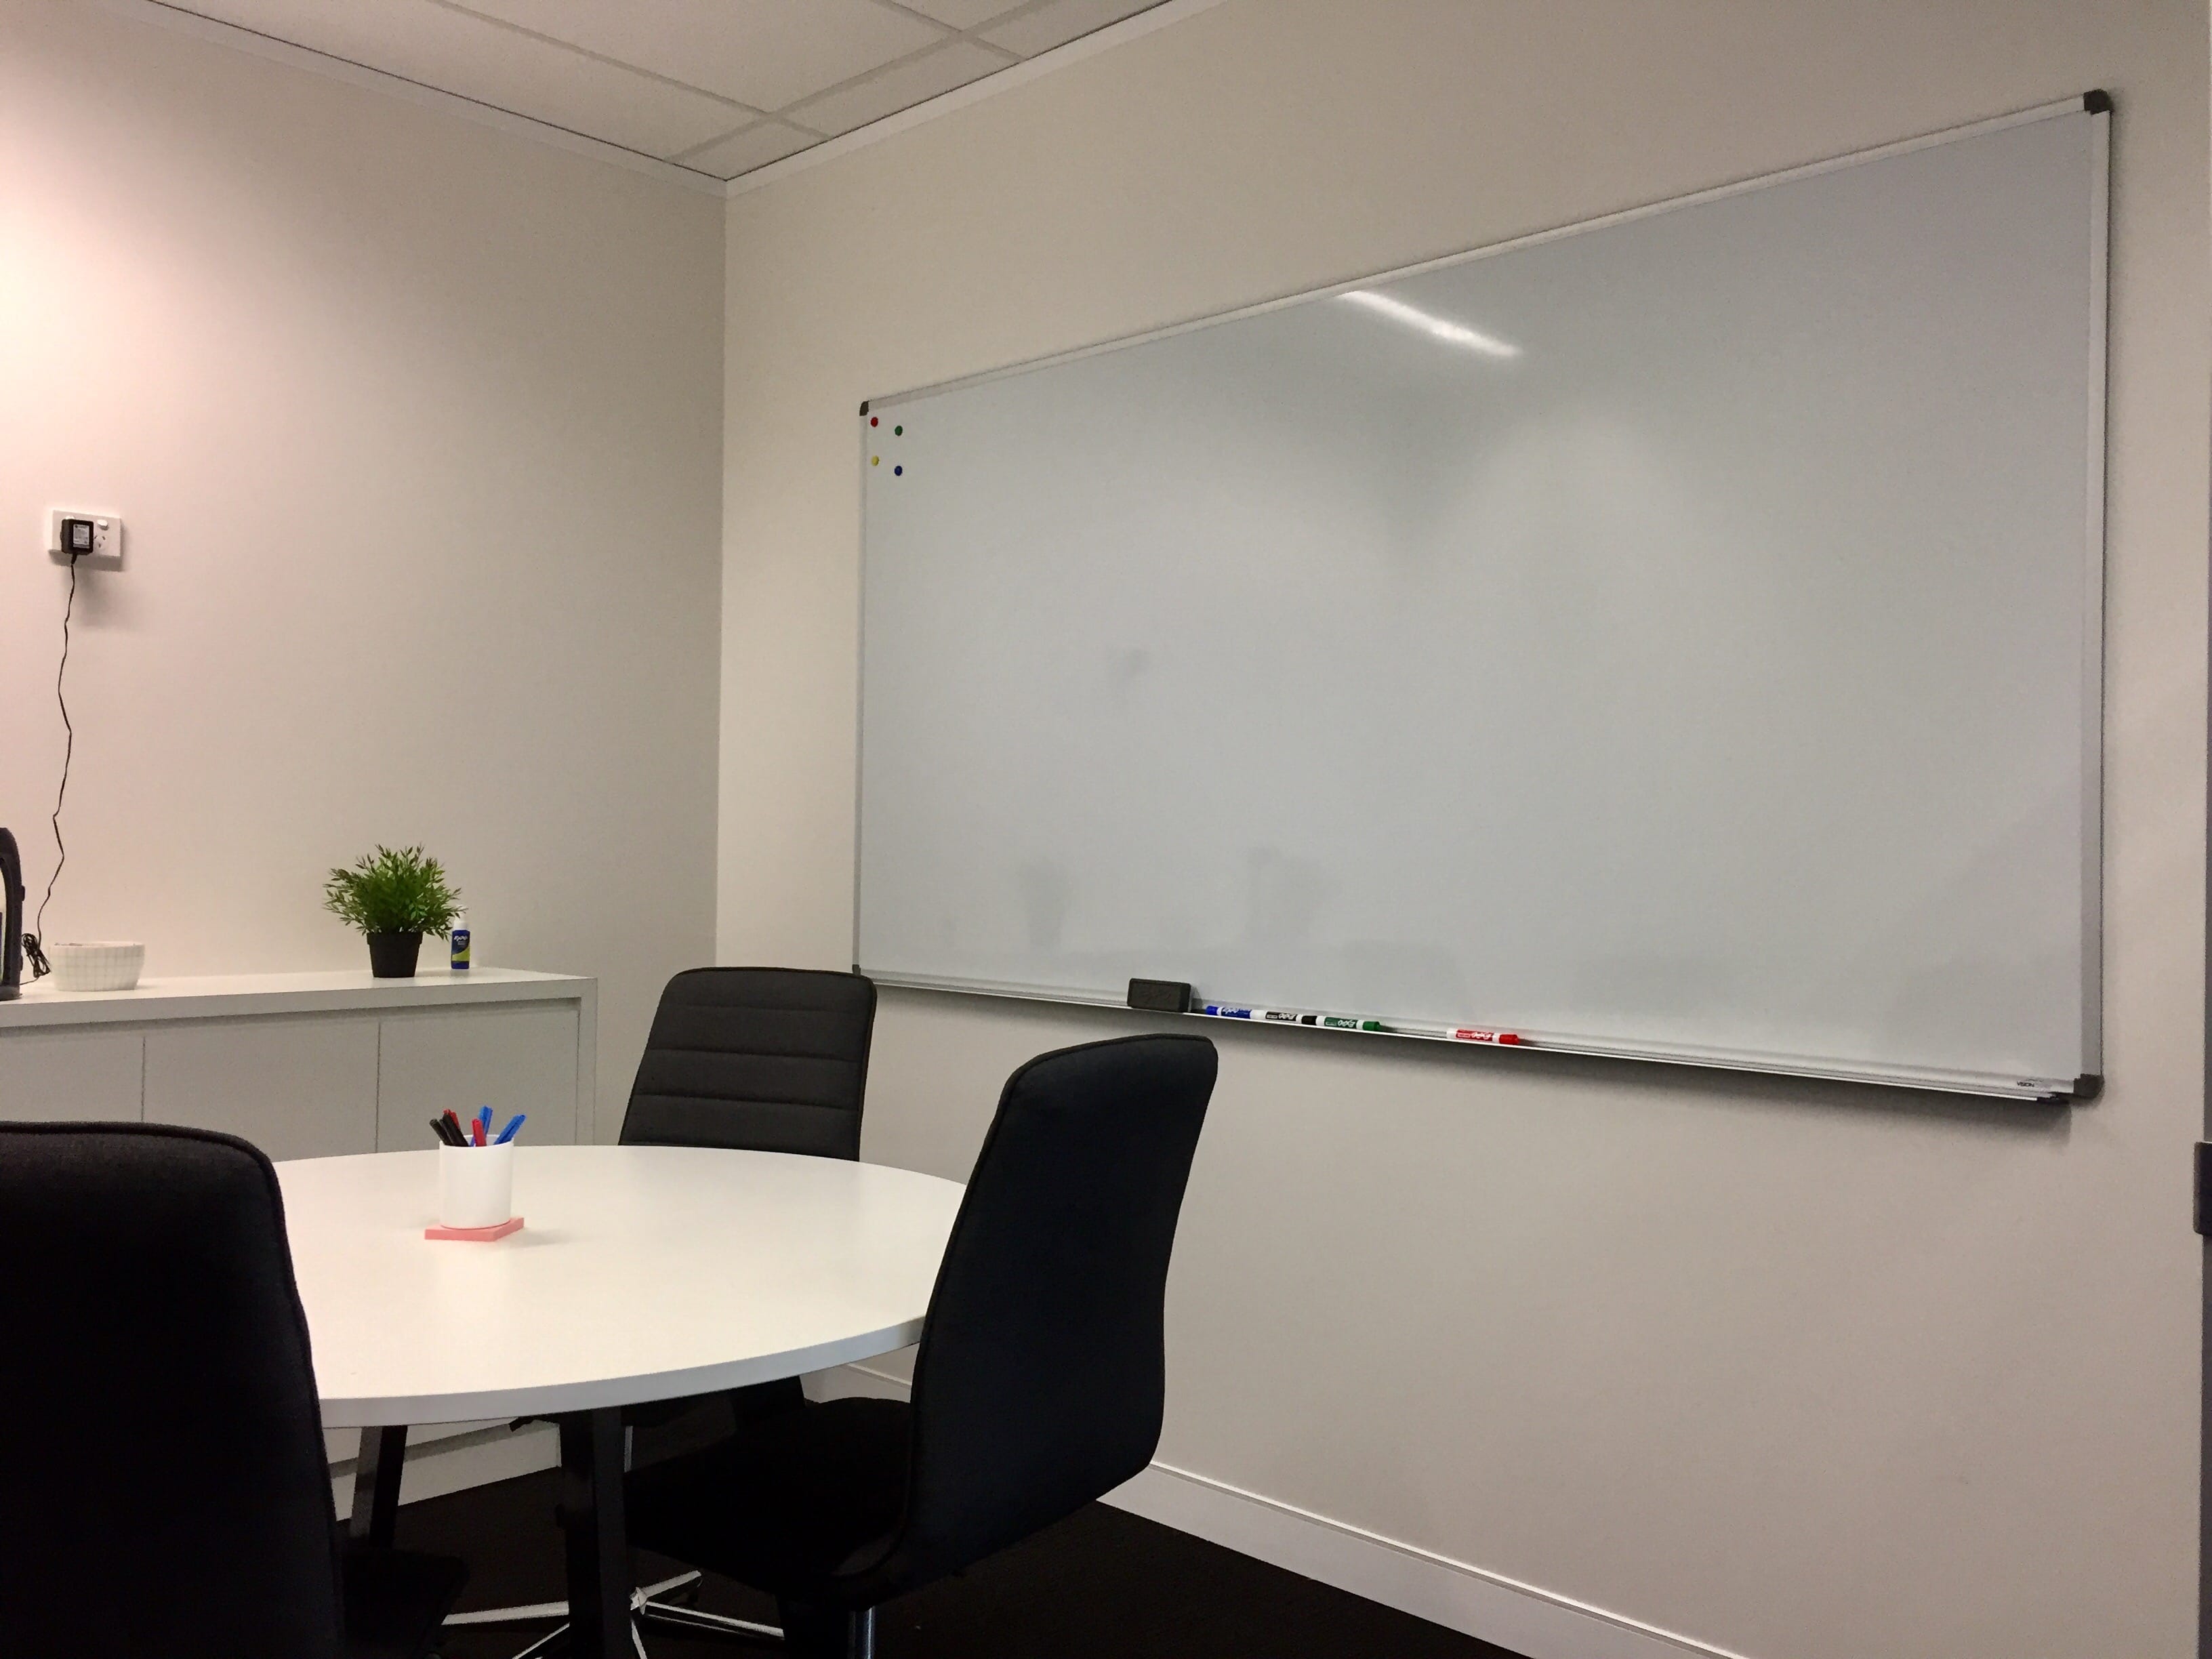 Acrylic Commercial Whiteboard